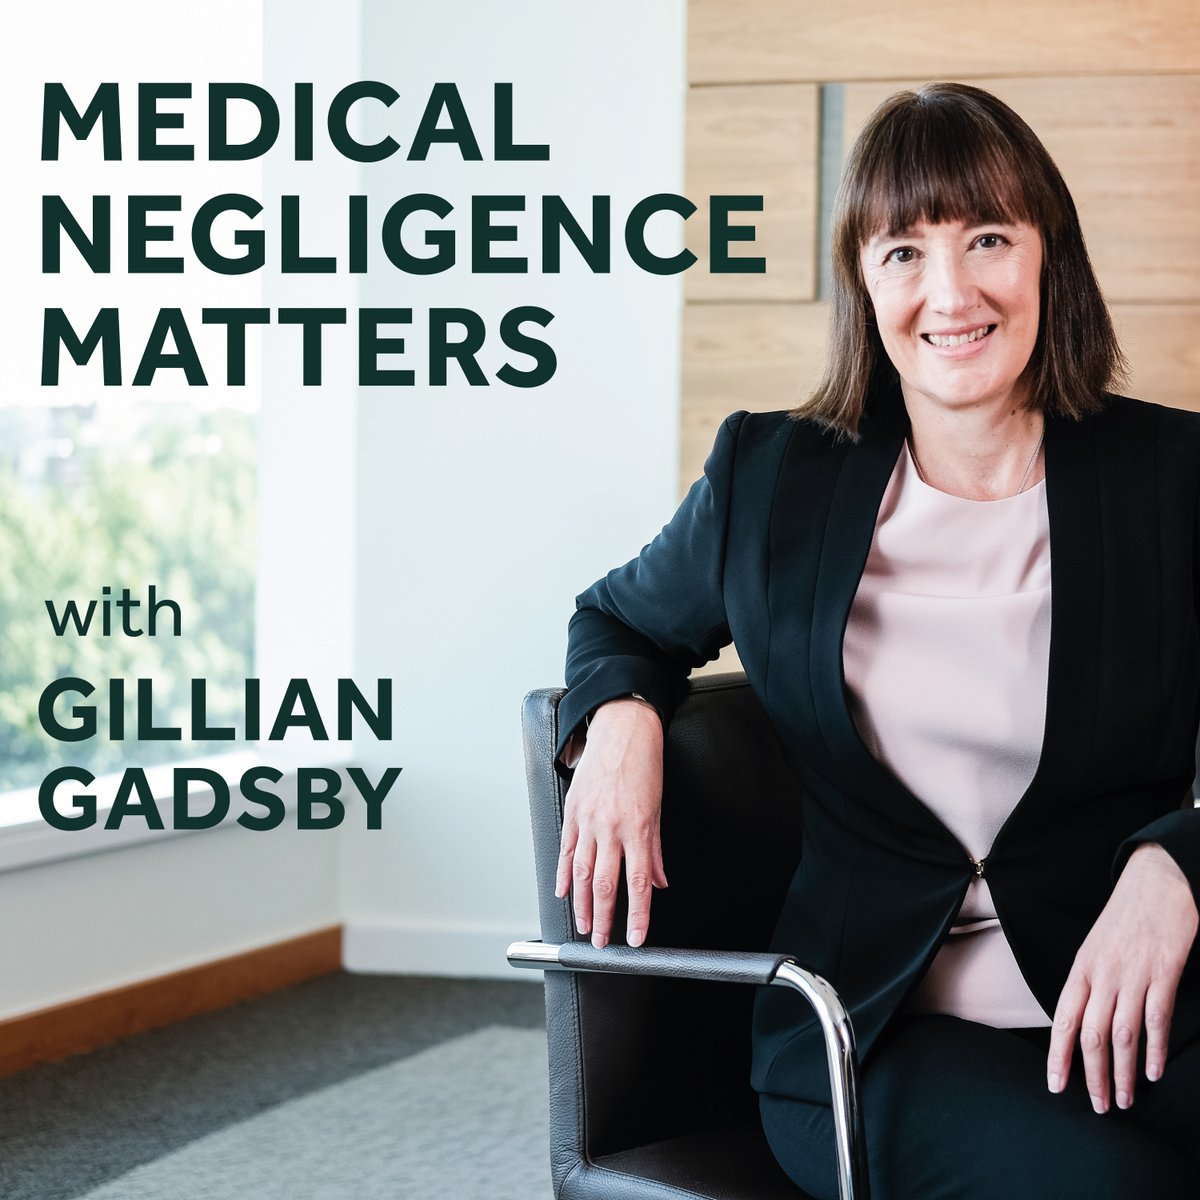 I’ve launched a brand new podcast: ‘Medical Negligence Matters’! 🎙️

Learn all about #medicalnegligence and making a claim – subscribe on YouTube, Spotify & Apple Podcasts:

youtube.com/@GillianGadsby
open.spotify.com/show/7i5R5R8Hm…
podcasts.apple.com/gb/podcast/med…